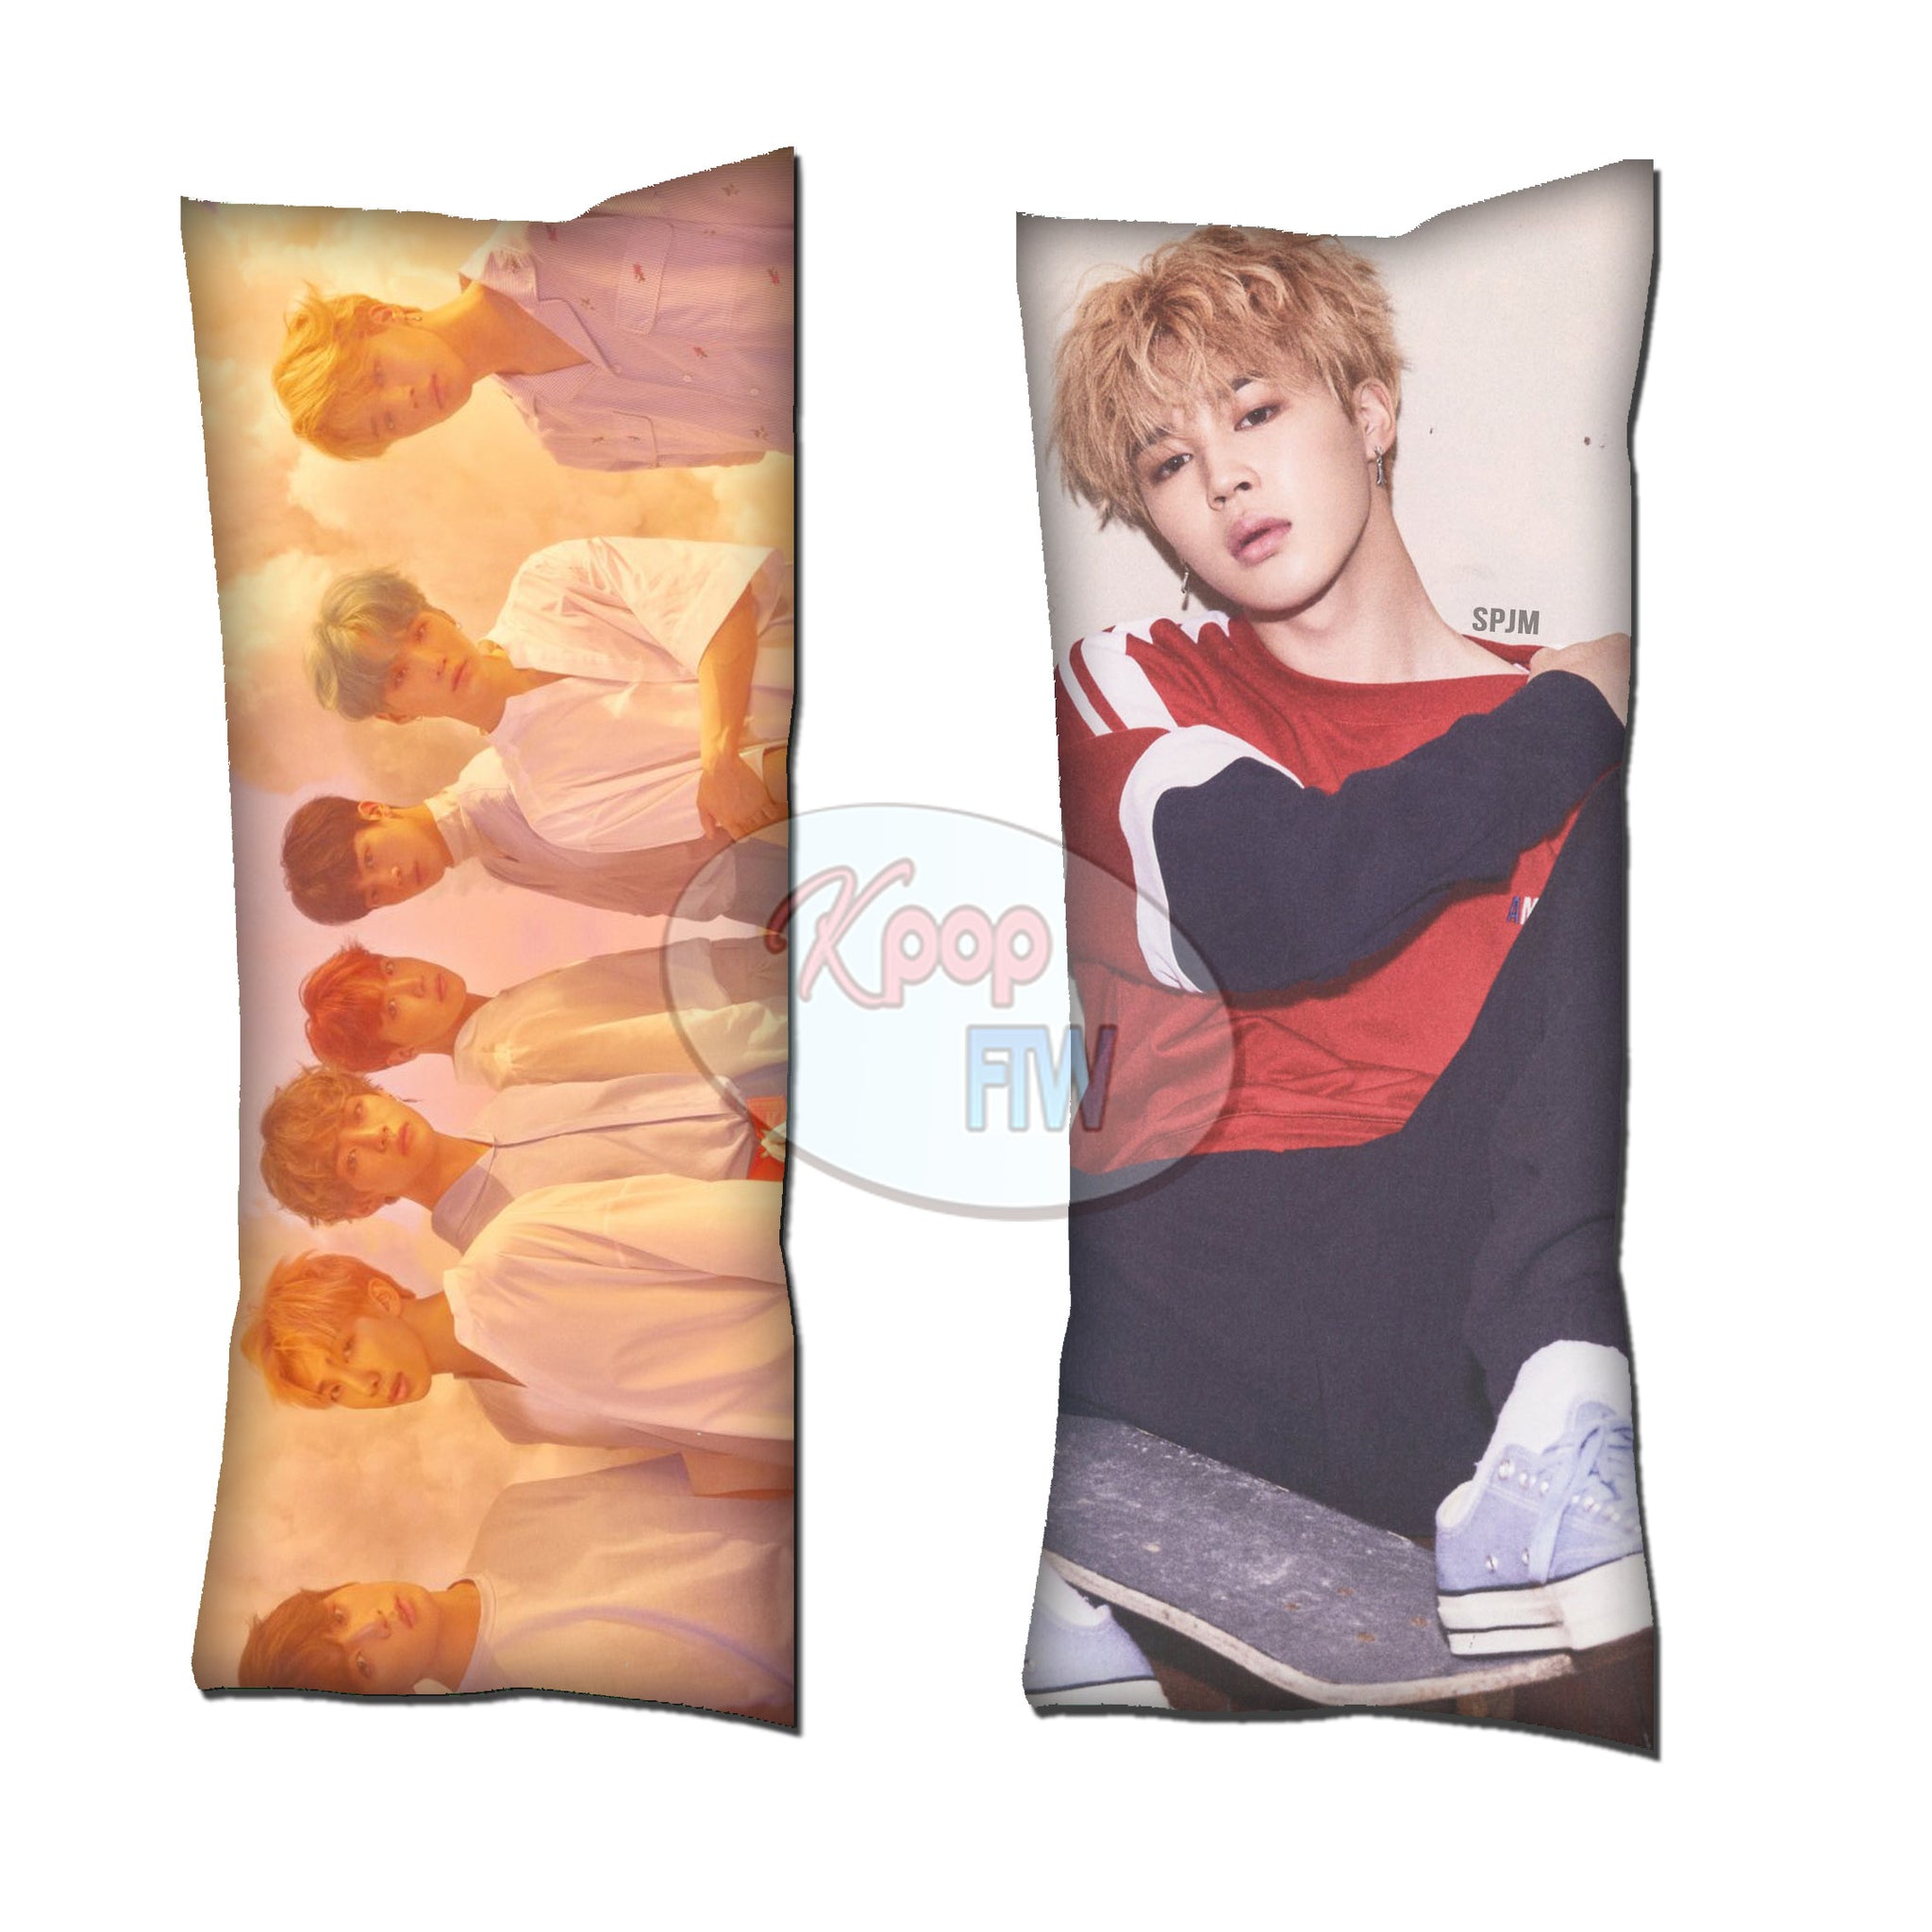 BTS You Never Walk Alone Jimin Body Pillow- Buy Now Cosplay-FTW